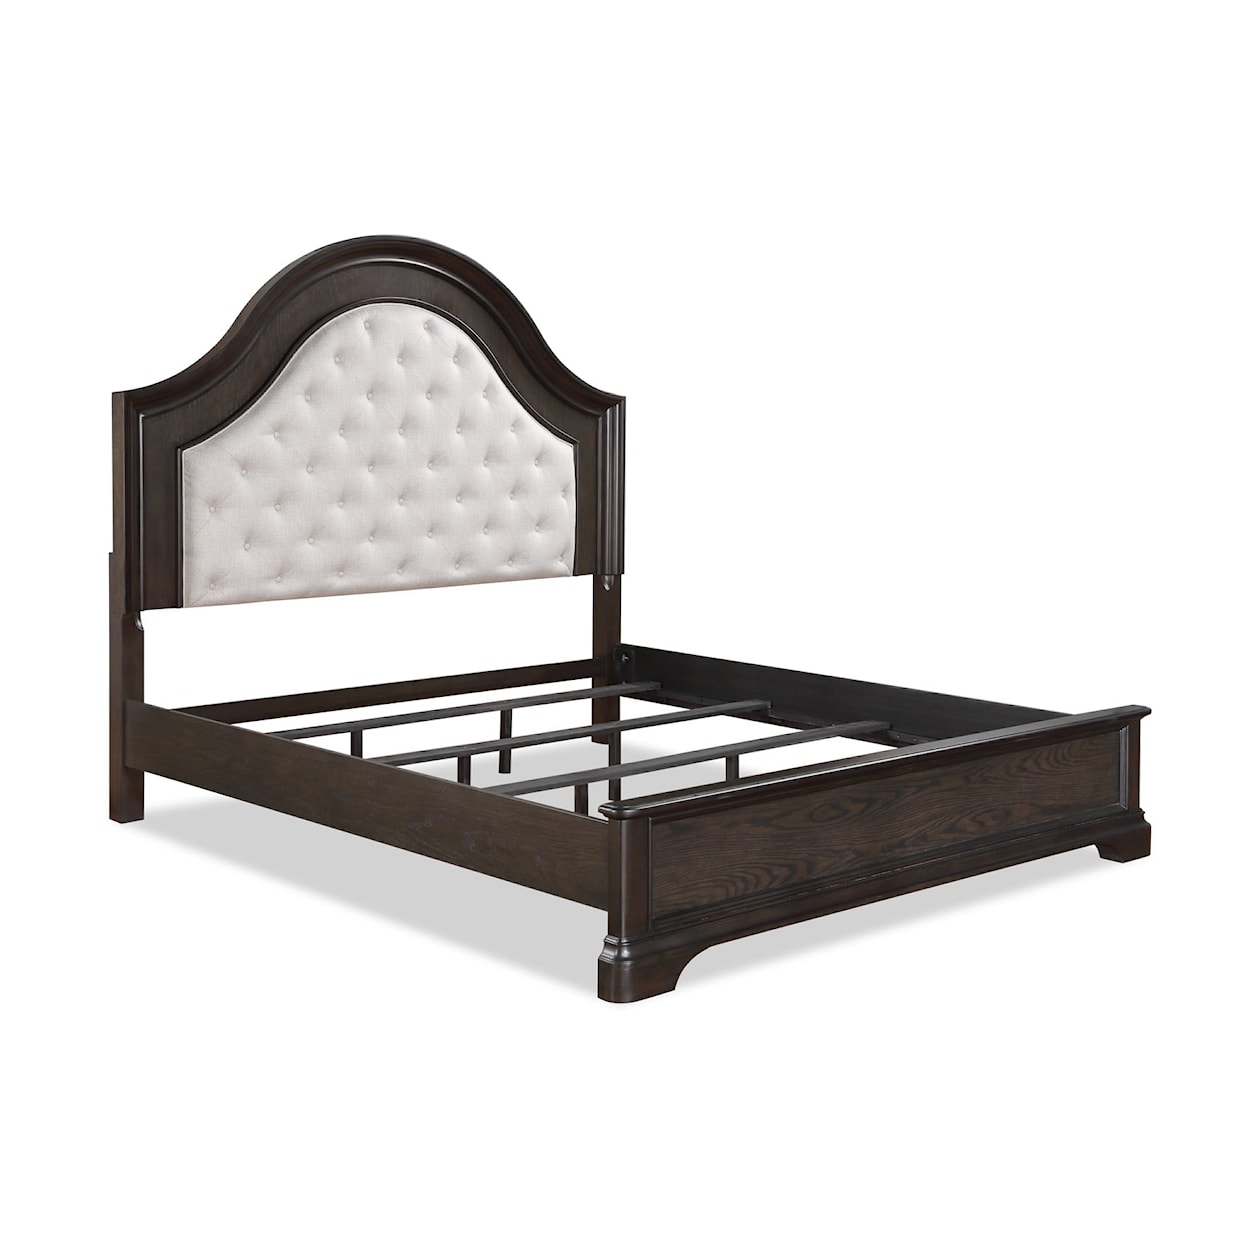 CM Duke King Arched Panel Bed